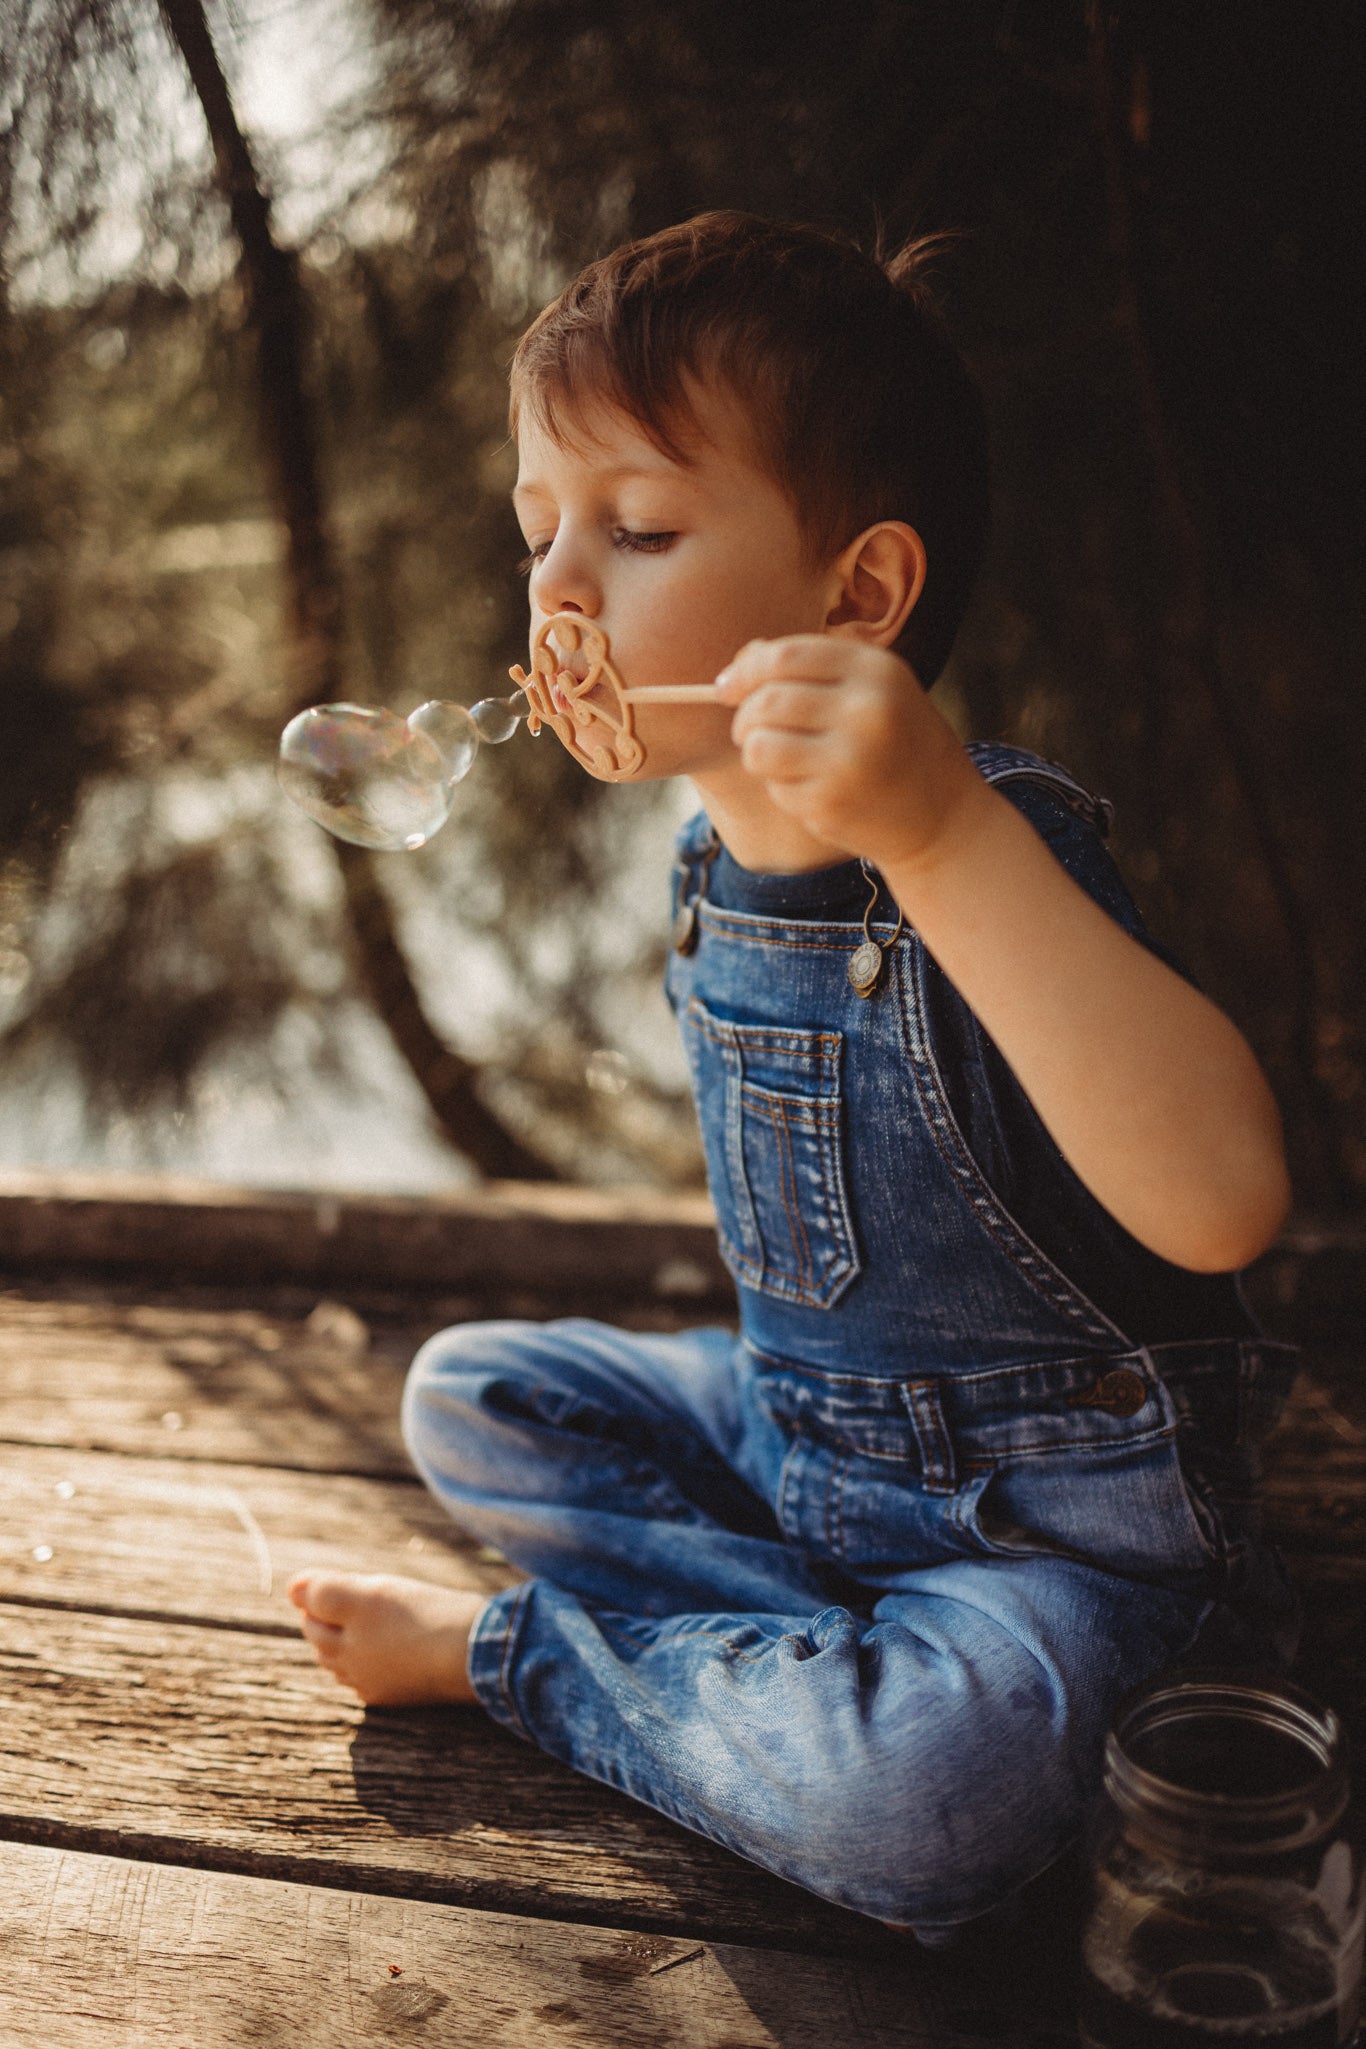 A boy in denim dungarees is blowing bubbles through the ladybird shaped eco bubble wand from Kinfolk Pantry. The boy is sitting on a boardwalk in an outdoor forest setting.